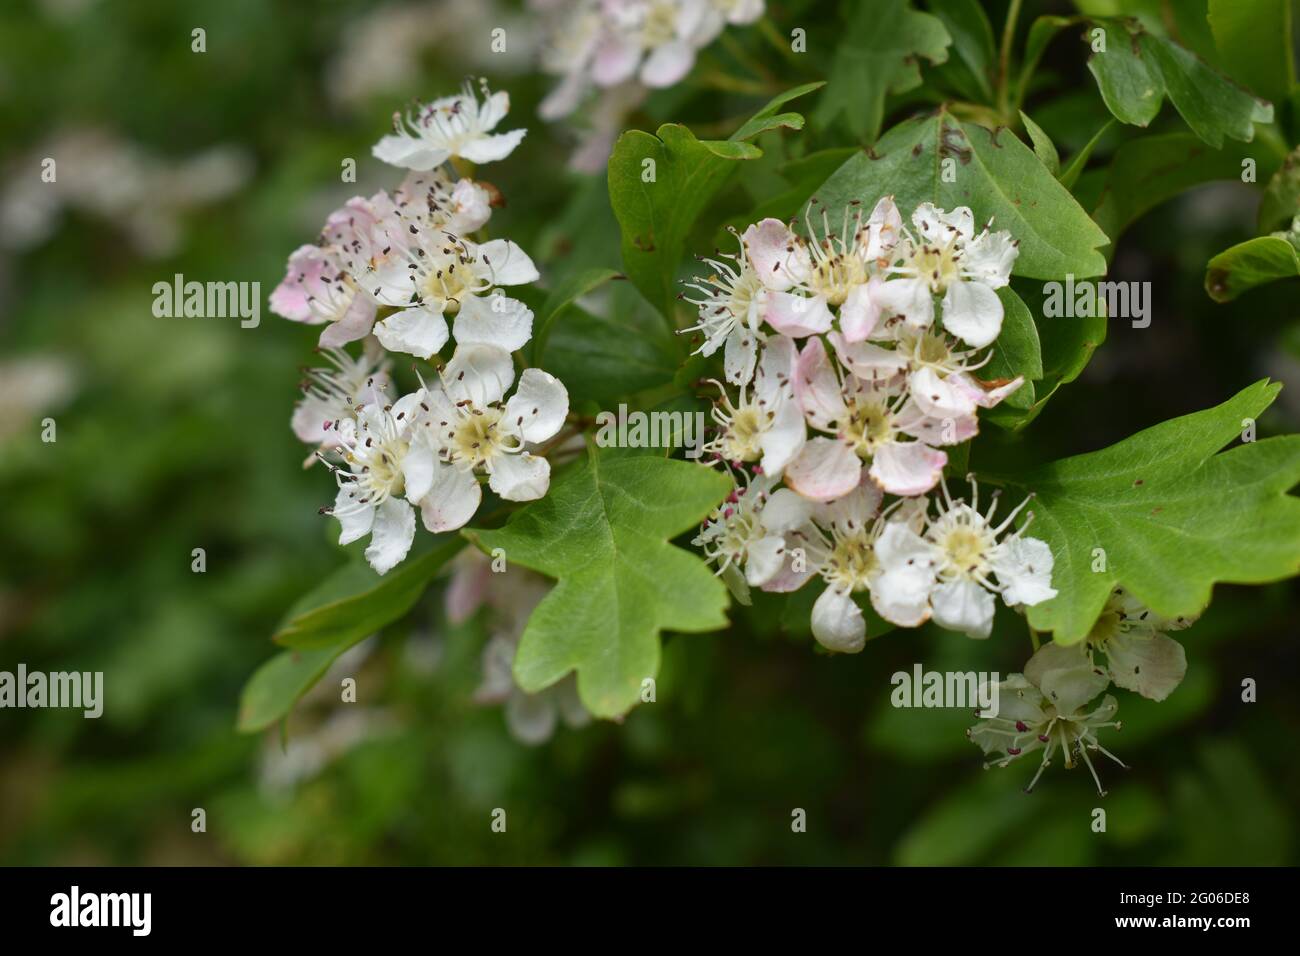 Hawthorn blossom, commonly known as May blossom or Mayflower/ May Flower. Stock Photo